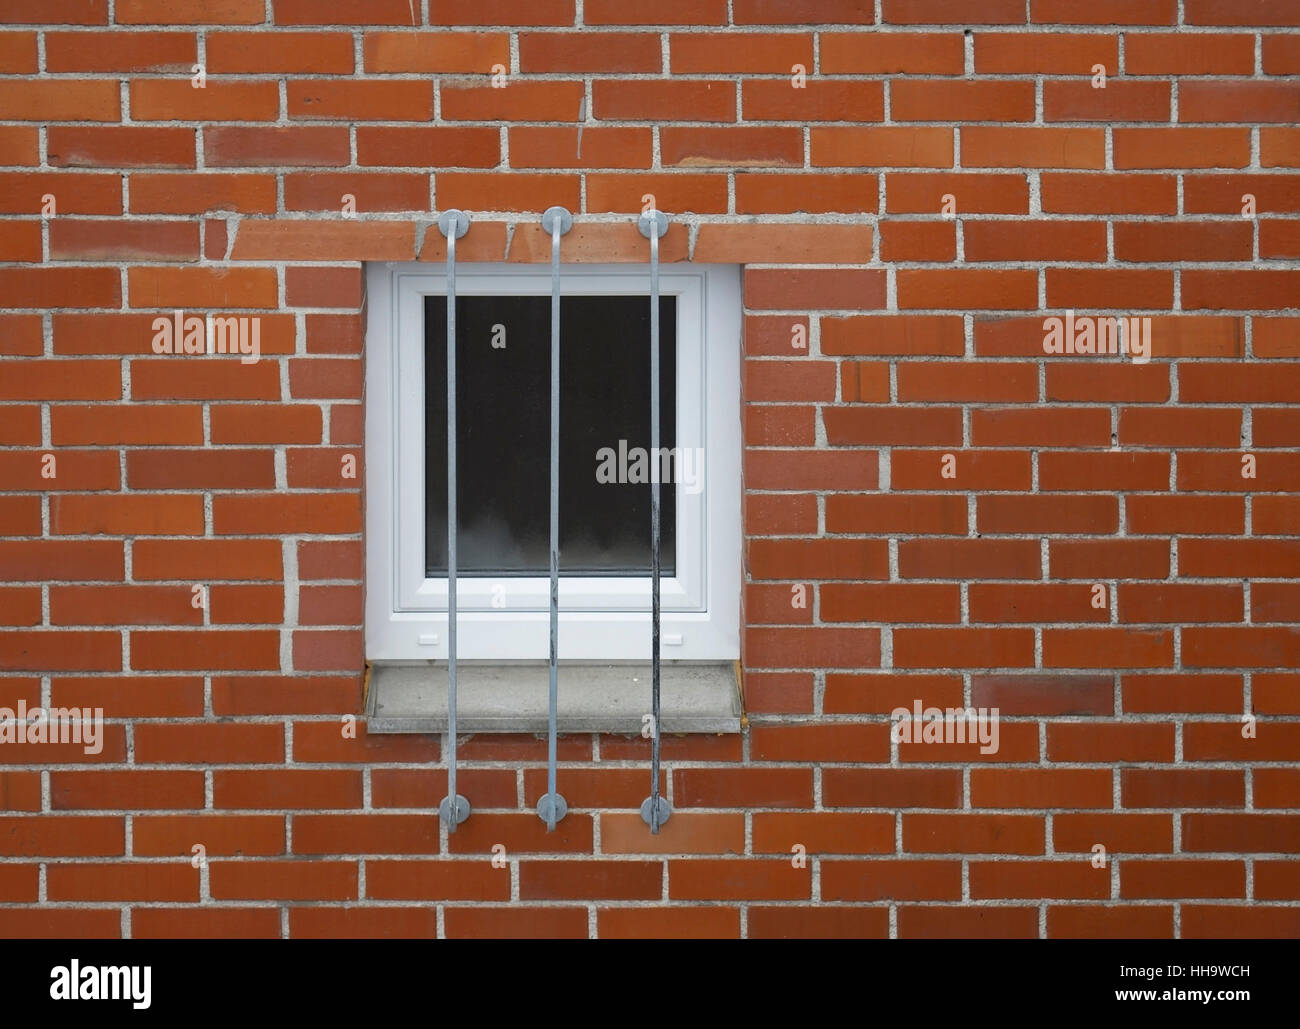 architectural detail of a barred window in a red brick wall Stock Photo